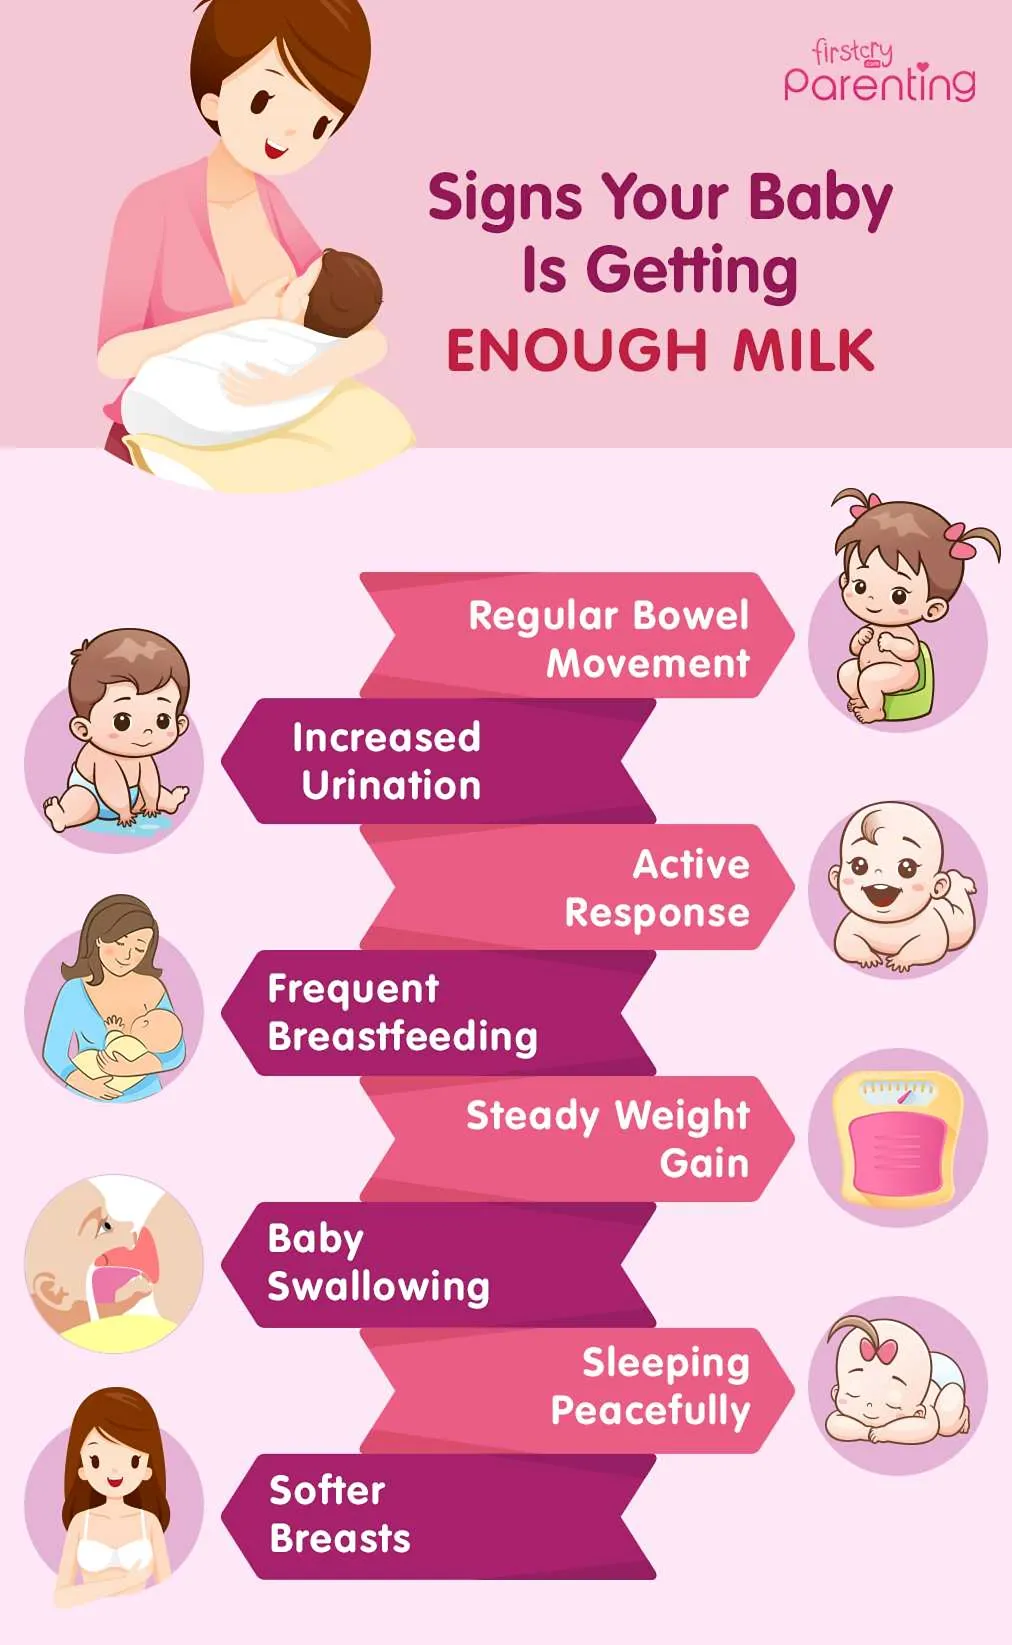 Signs Your Baby Is Getting Enough Milk